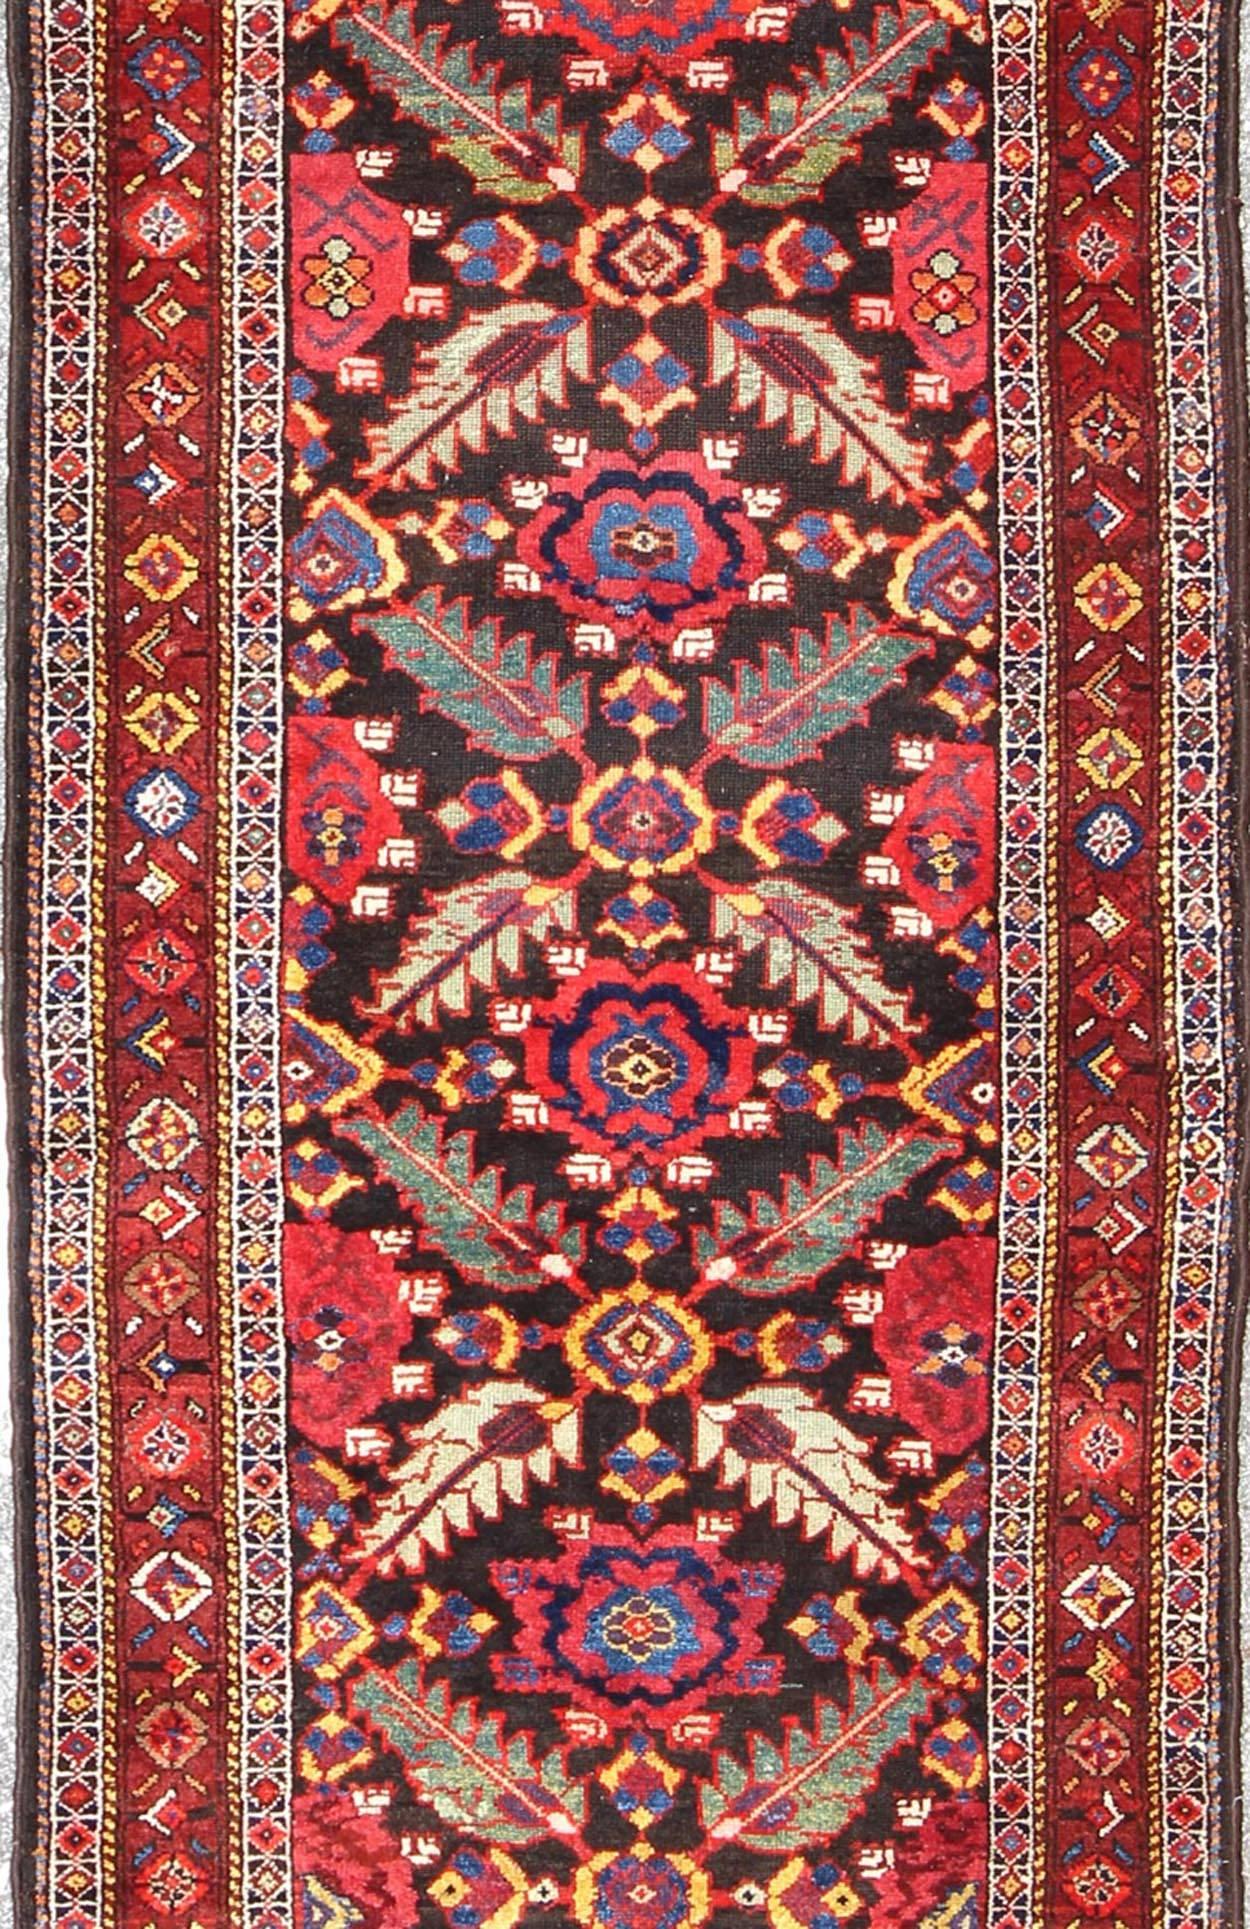 Hand-Knotted Colorful Jewel-Toned Antique Caucasian Karabagh Runner with Tribal Design For Sale